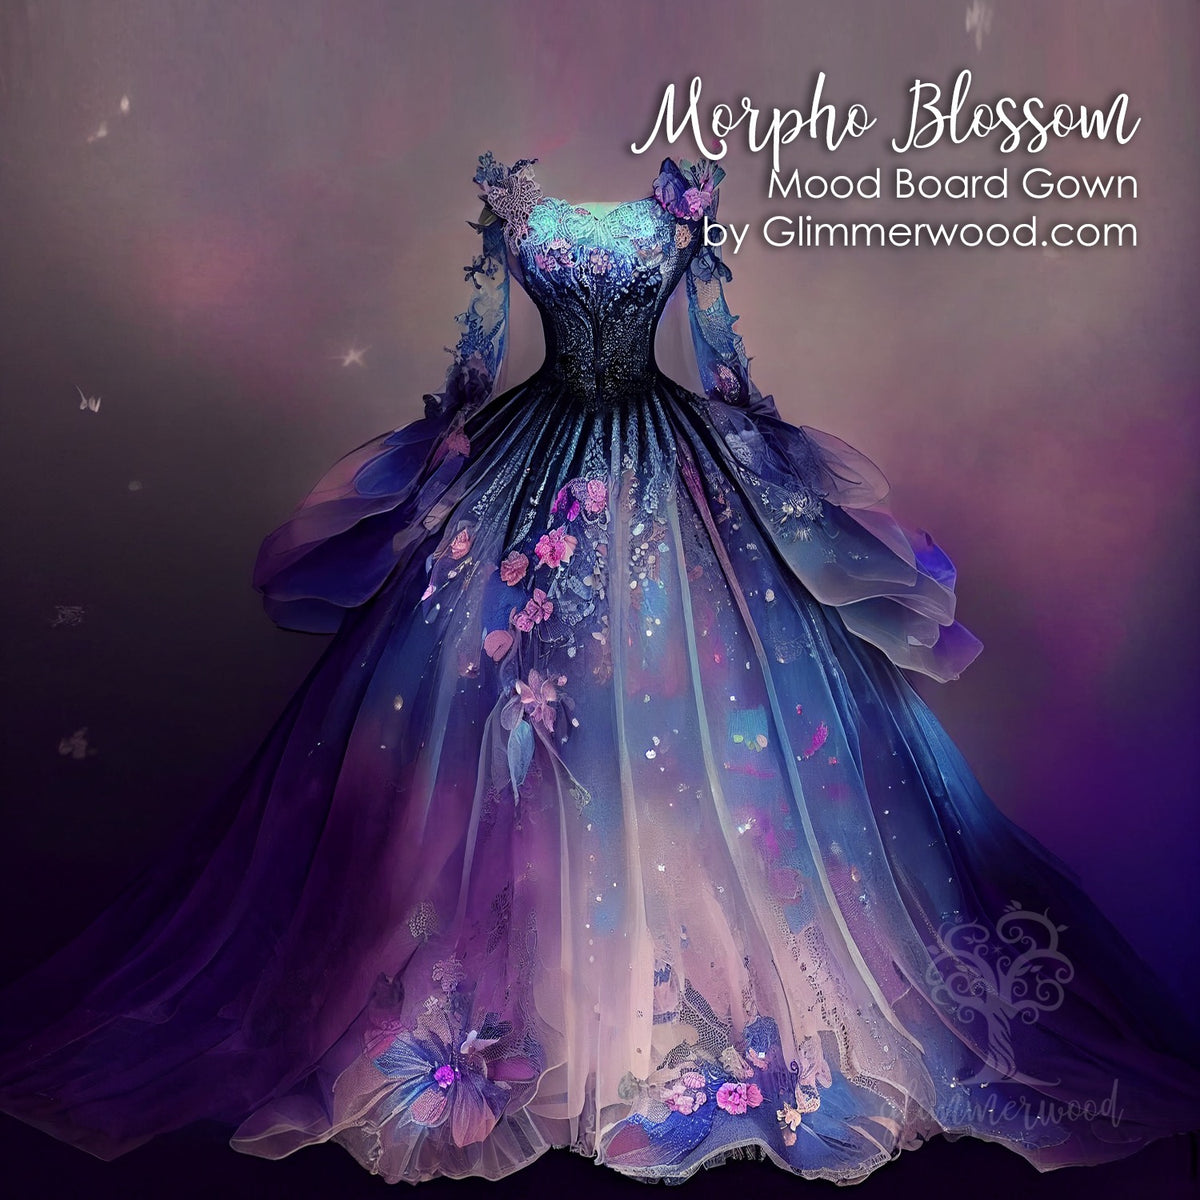 Morpho Blossom - Limited-Edition Mood Board Gown